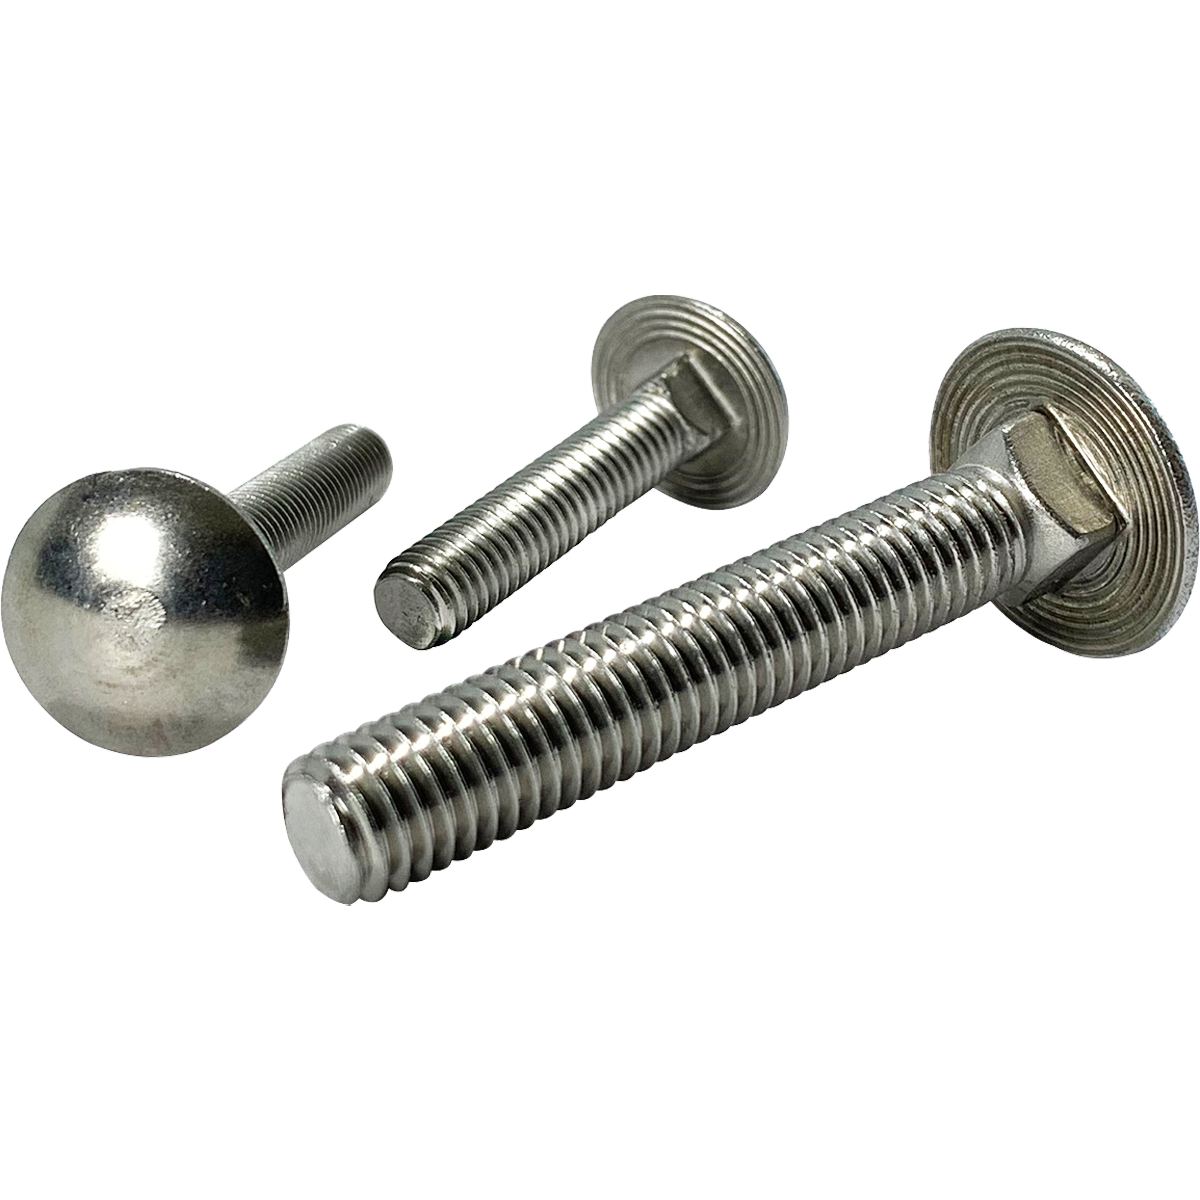 Cup square carriage bolts, also known as Coach Bolts